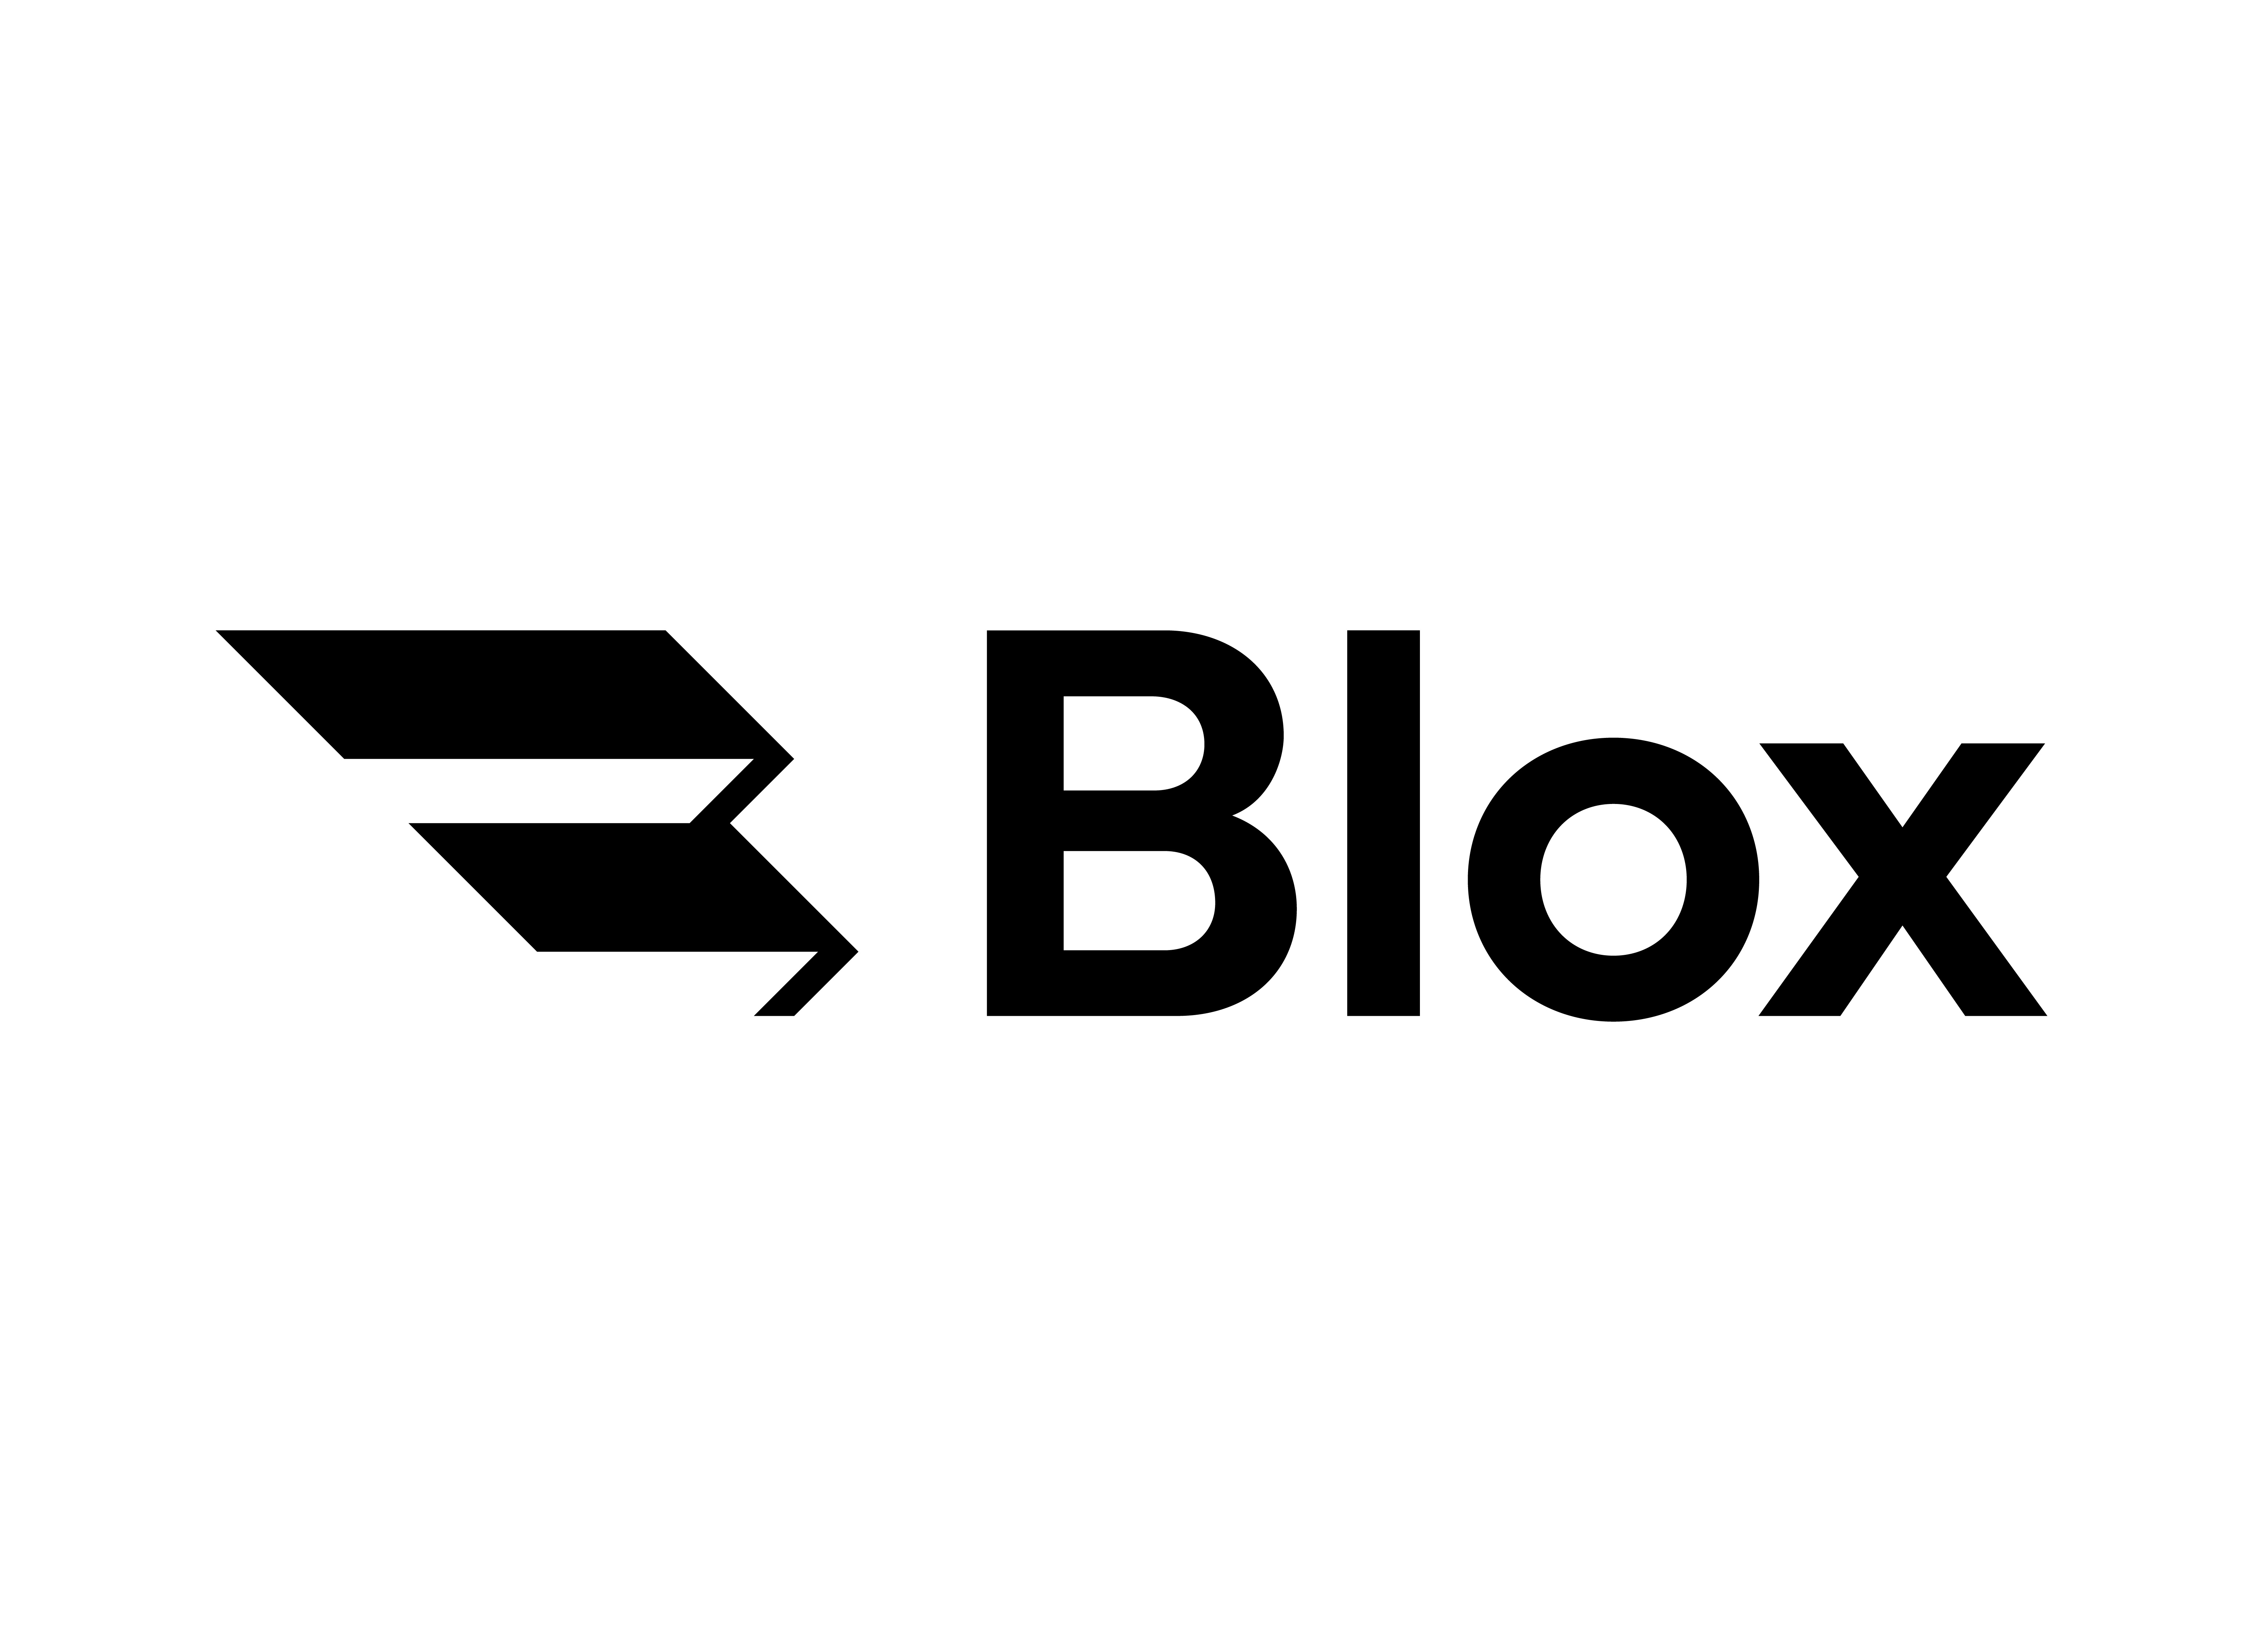 How To Get Bloxd.io Texture Pack On This Version NOW 